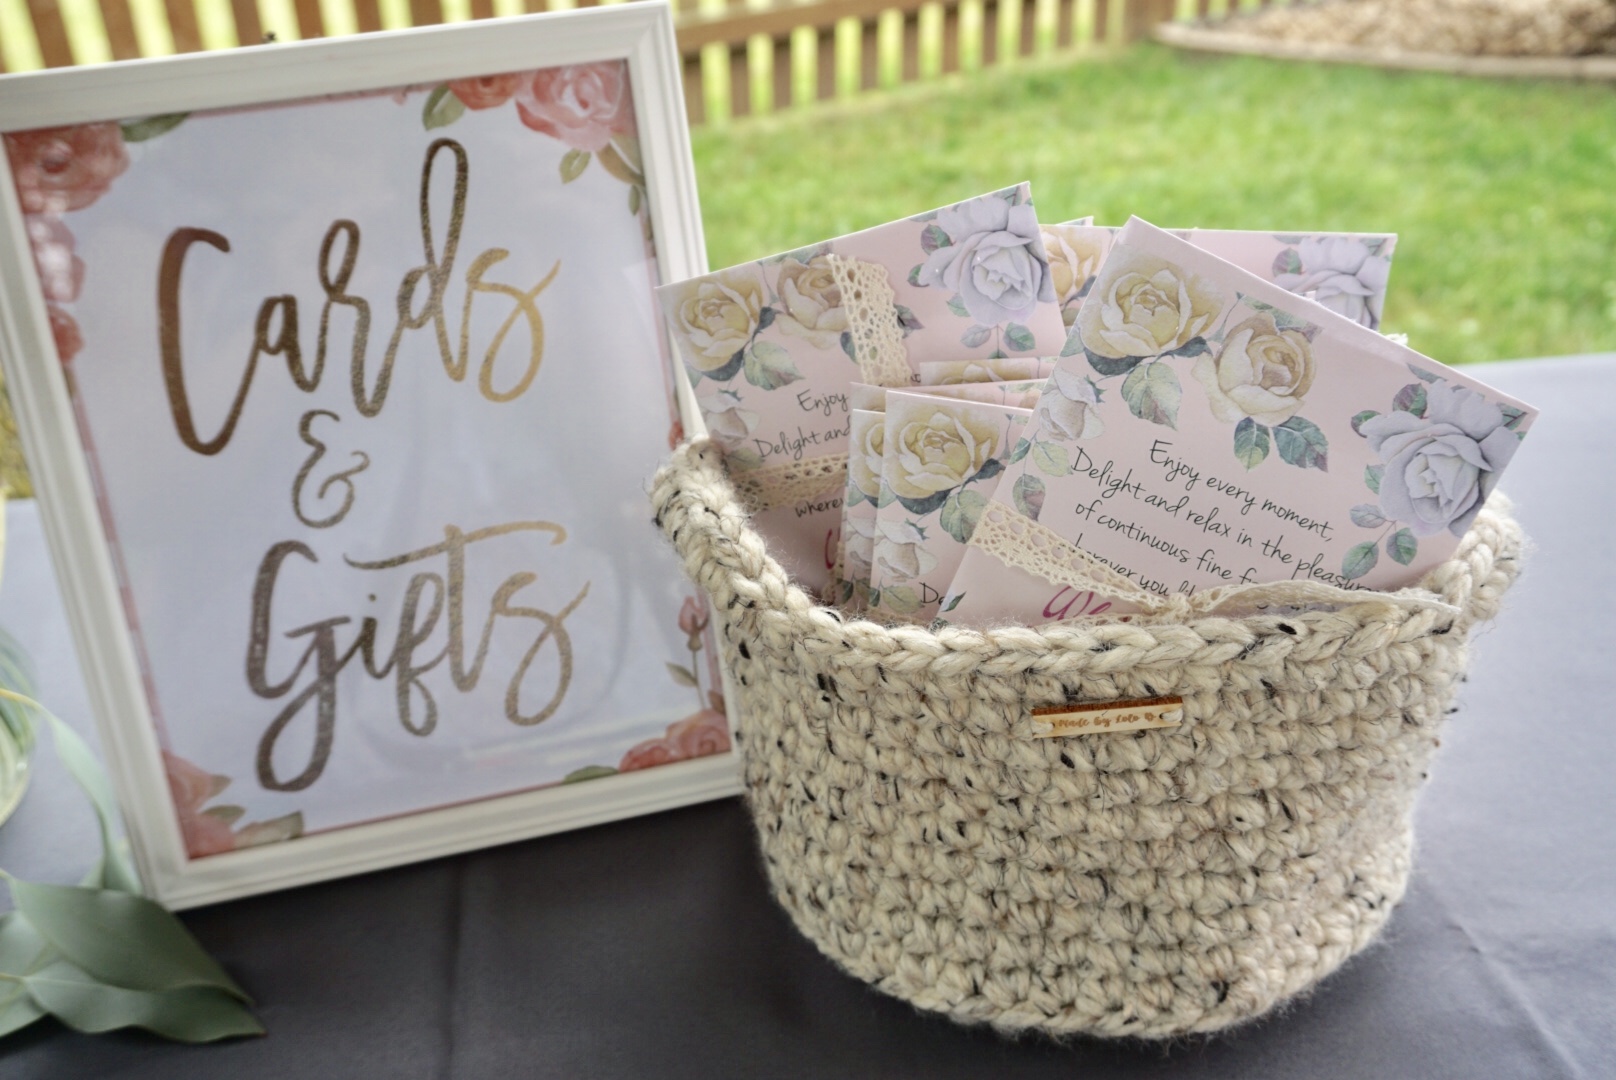  Knit basket with bridal shower favors from Dollar Tree 